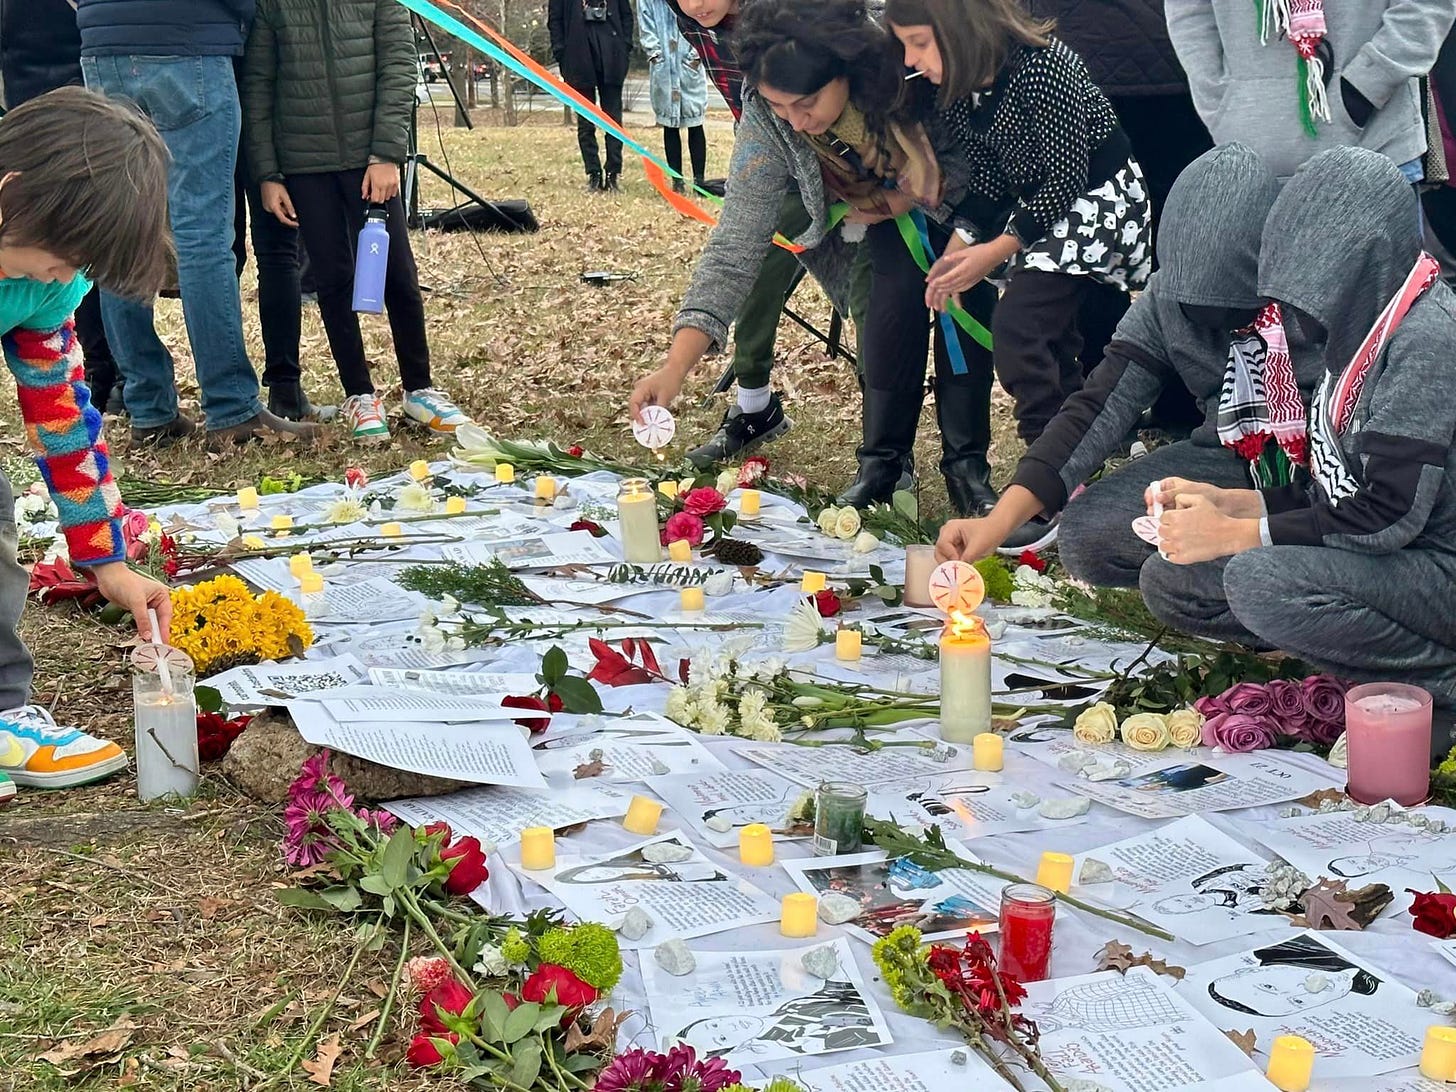 A group of people laying flowers and lighting candles on posters of killed journalists.